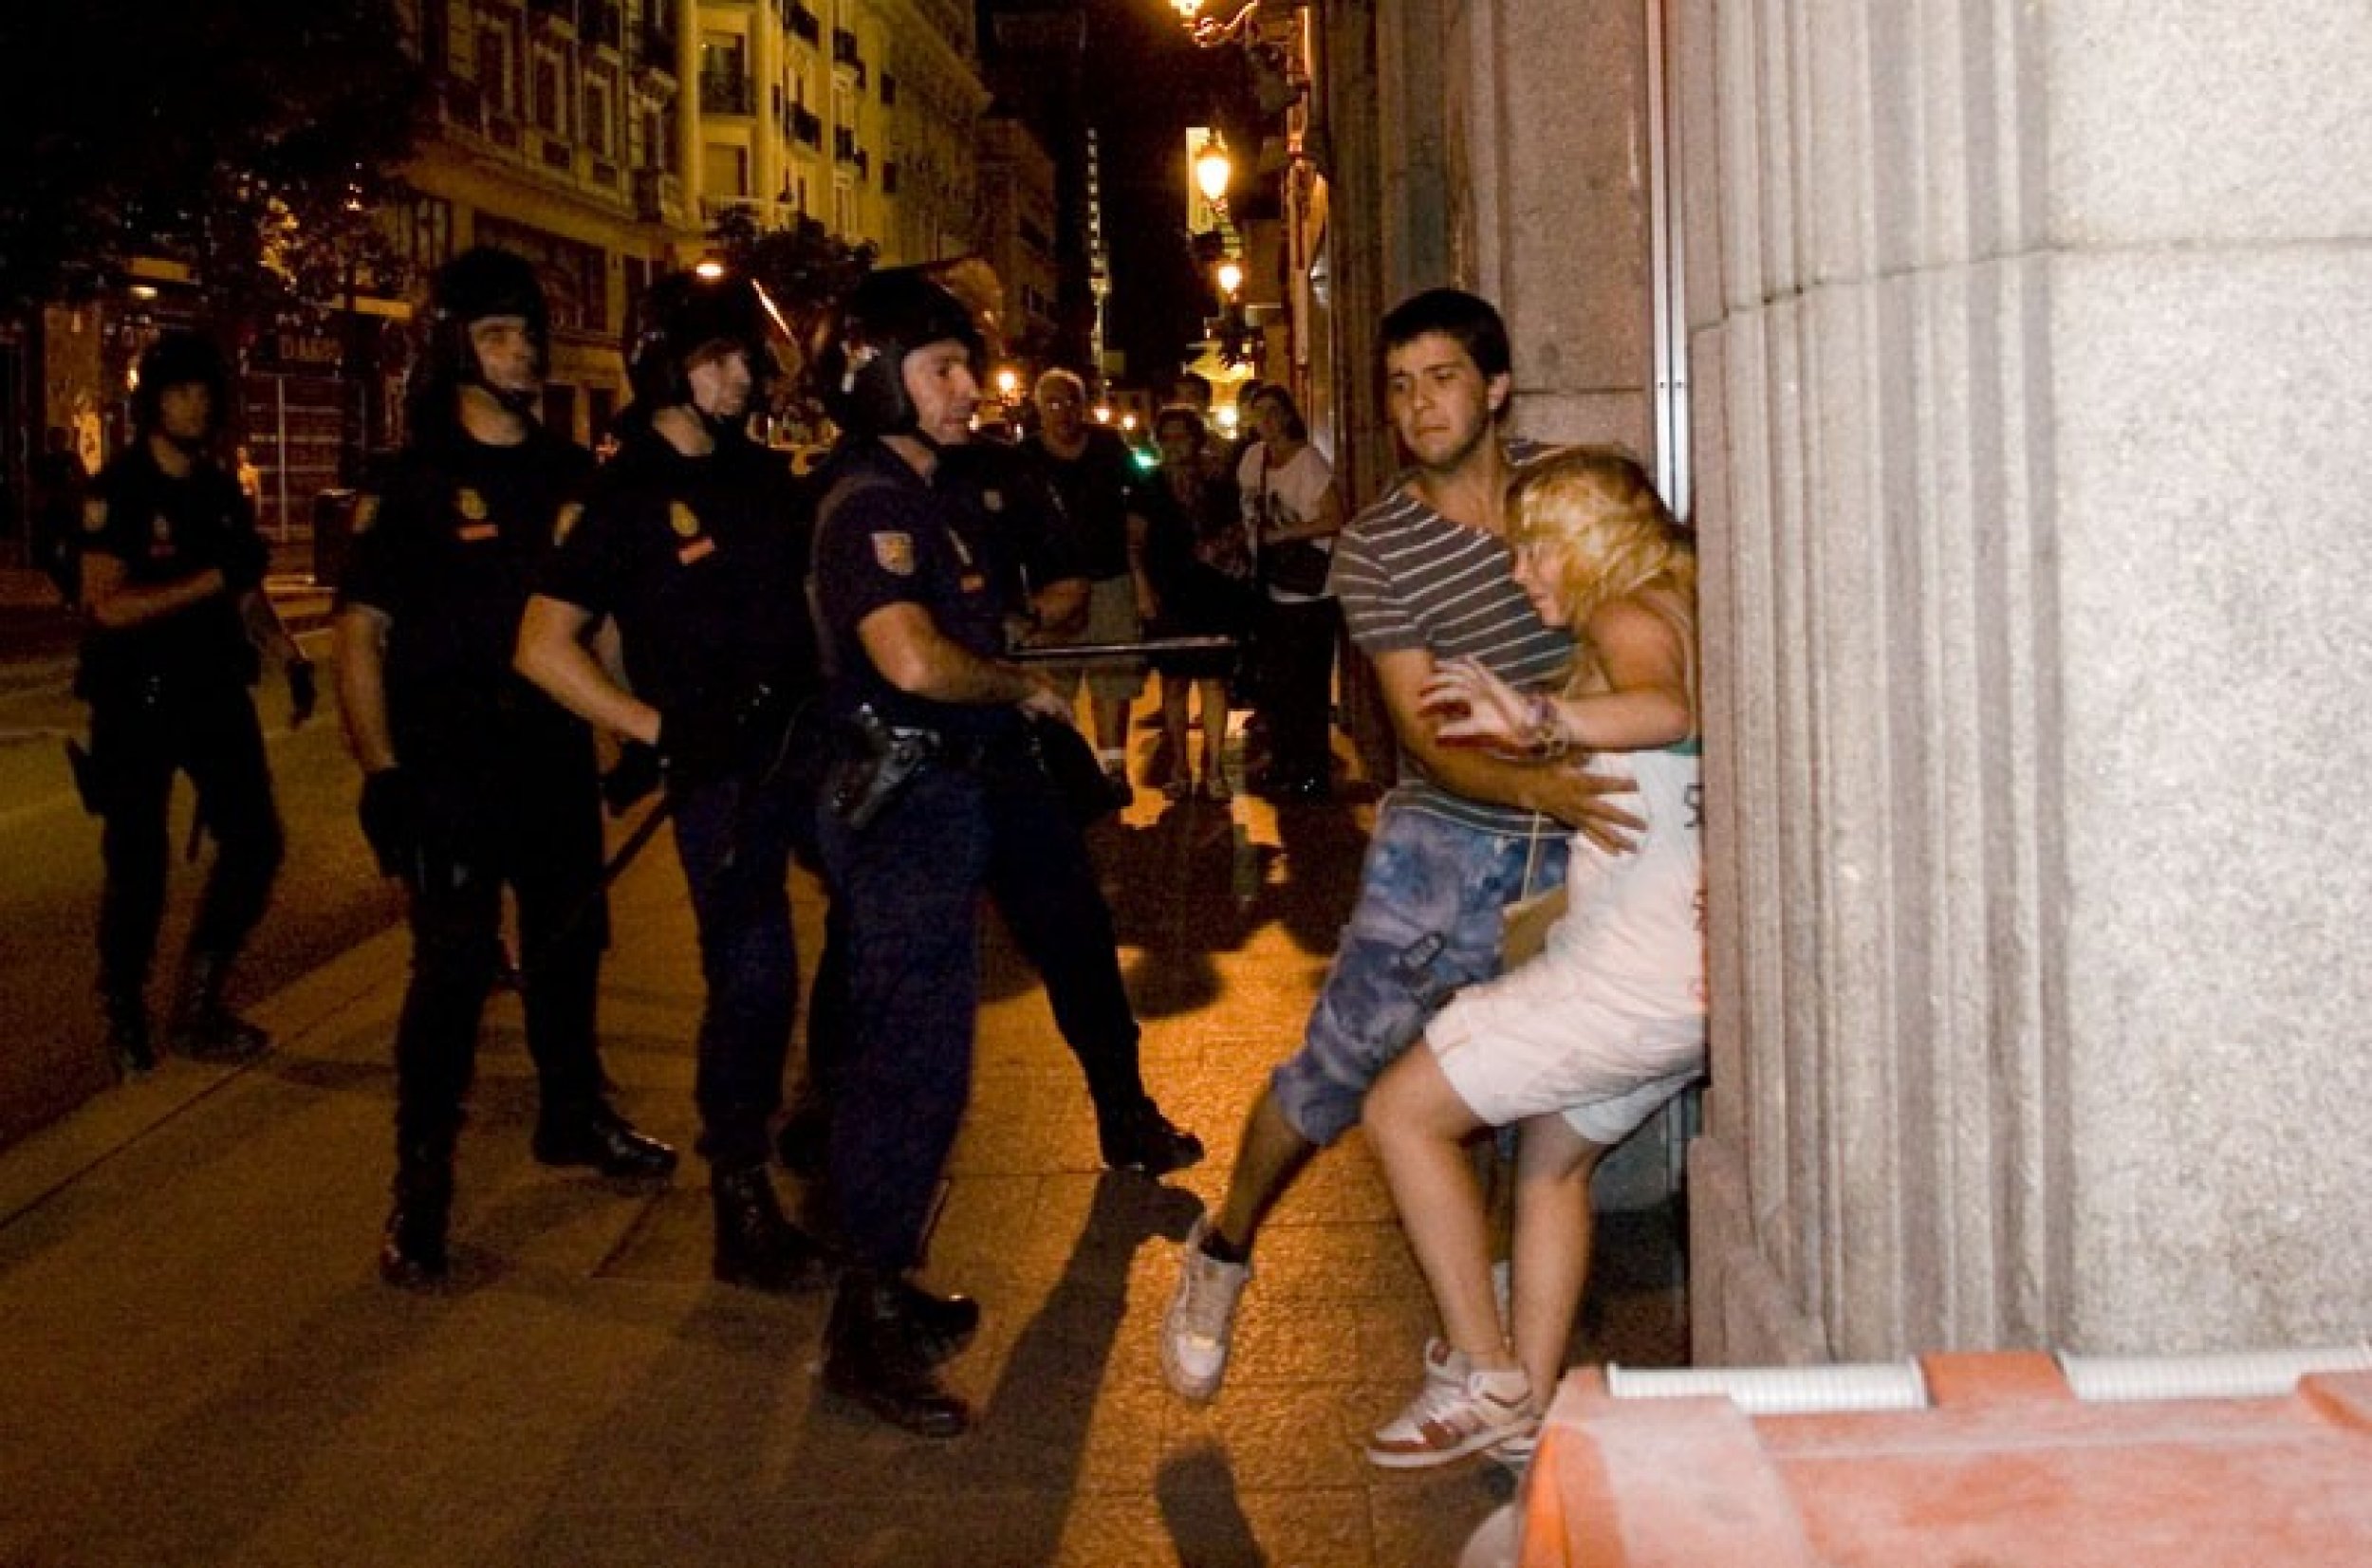 Spanish riot police assault young woman